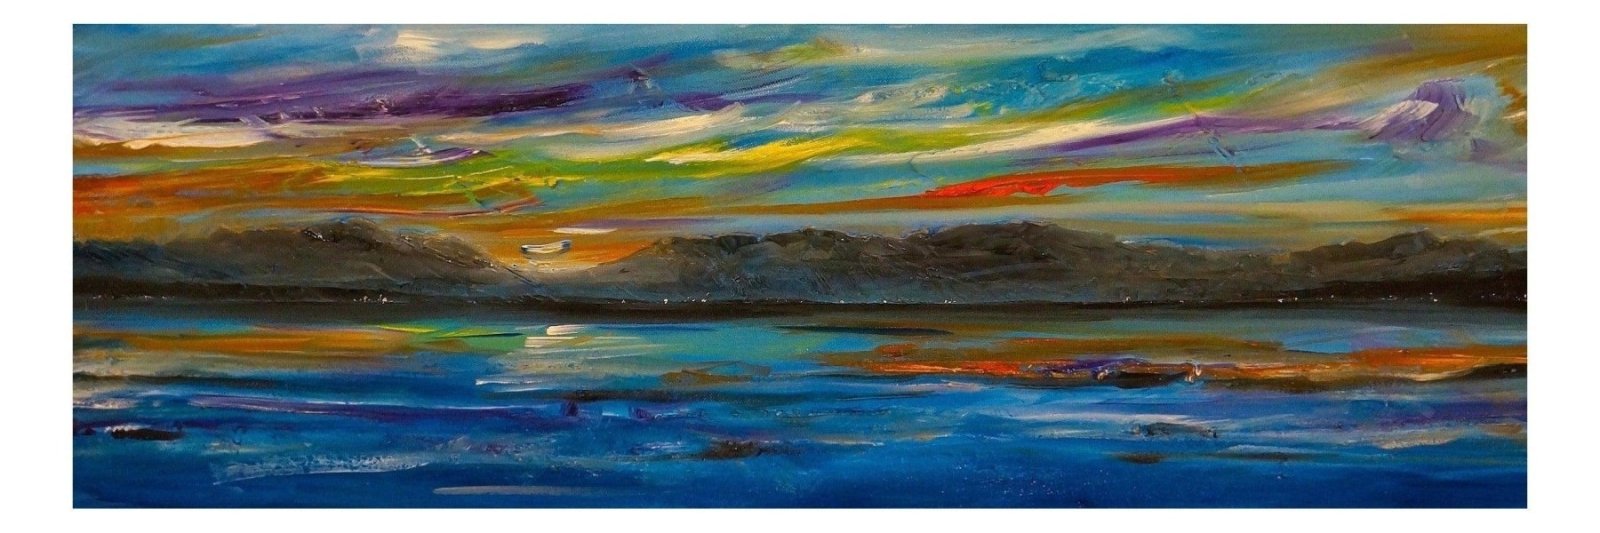 Clyde Summer Dusk-Panoramic Prints-River Clyde Art Gallery-Paintings, Prints, Homeware, Art Gifts From Scotland By Scottish Artist Kevin Hunter